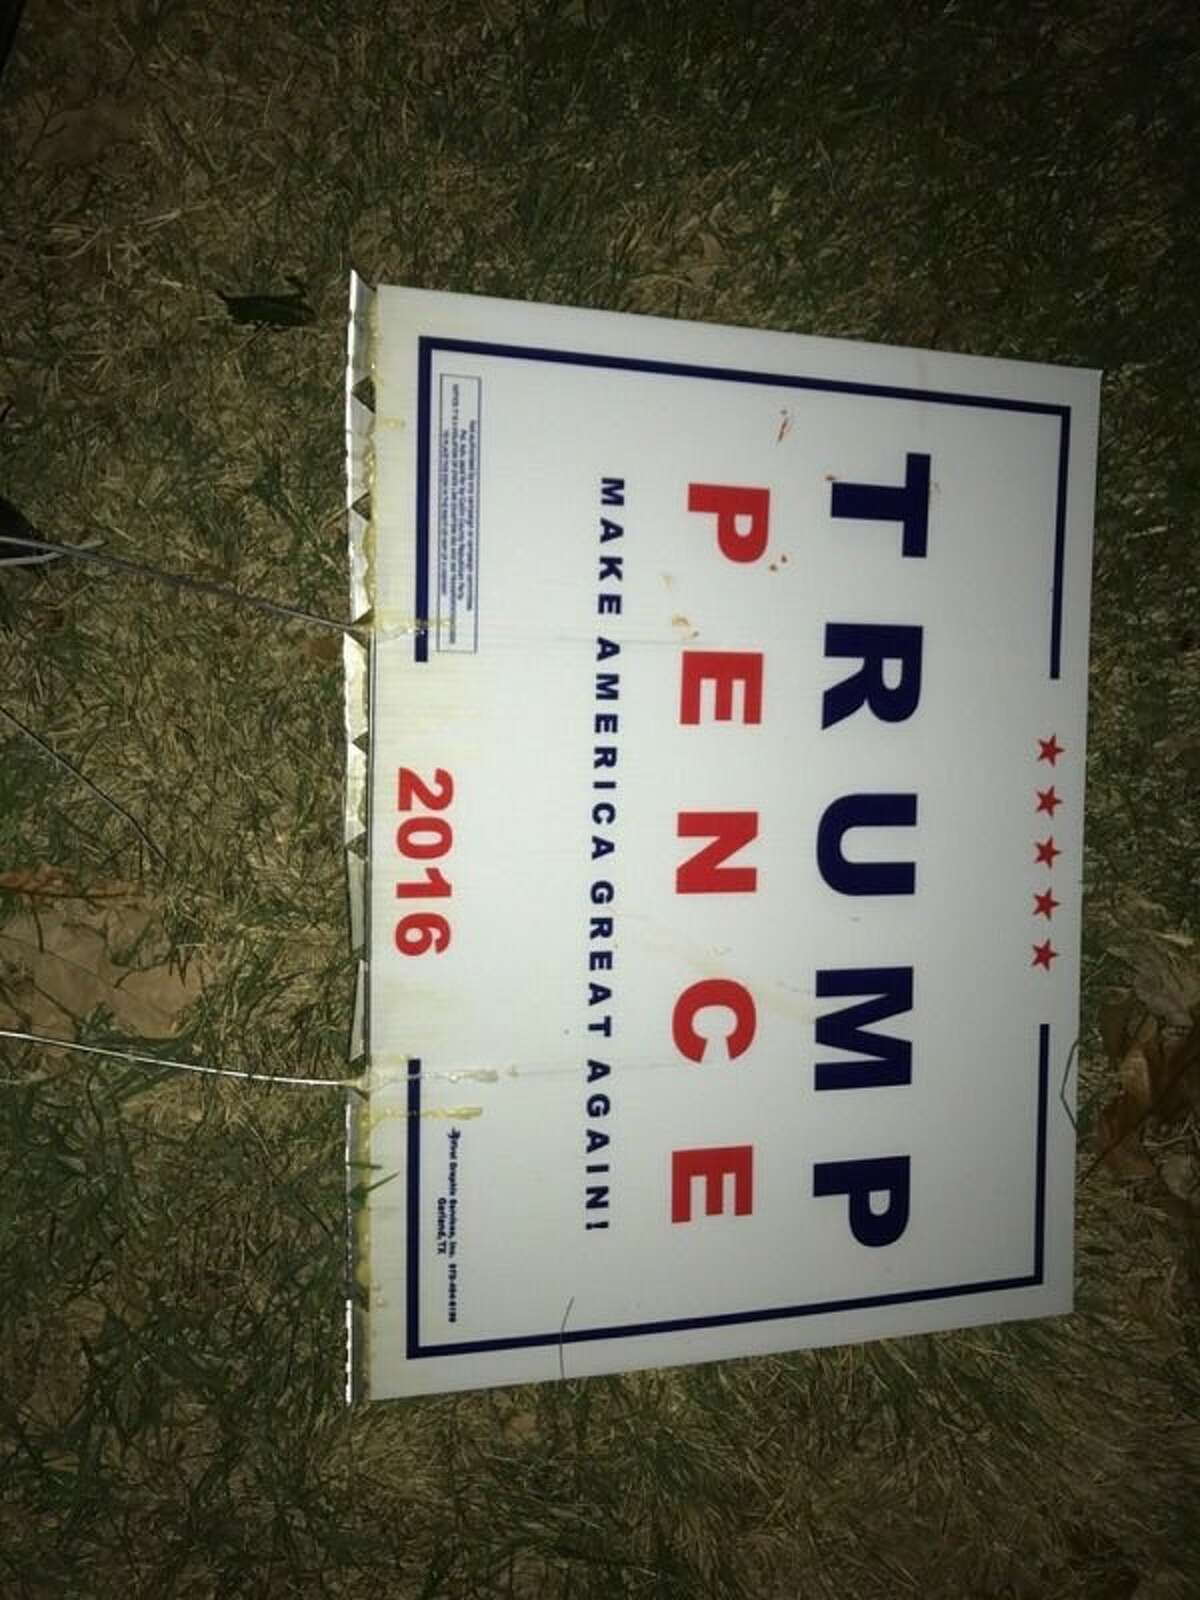 Officials in Collin County are investigating a Donald Trump campaign sign laced with razor blades found at a polling place.